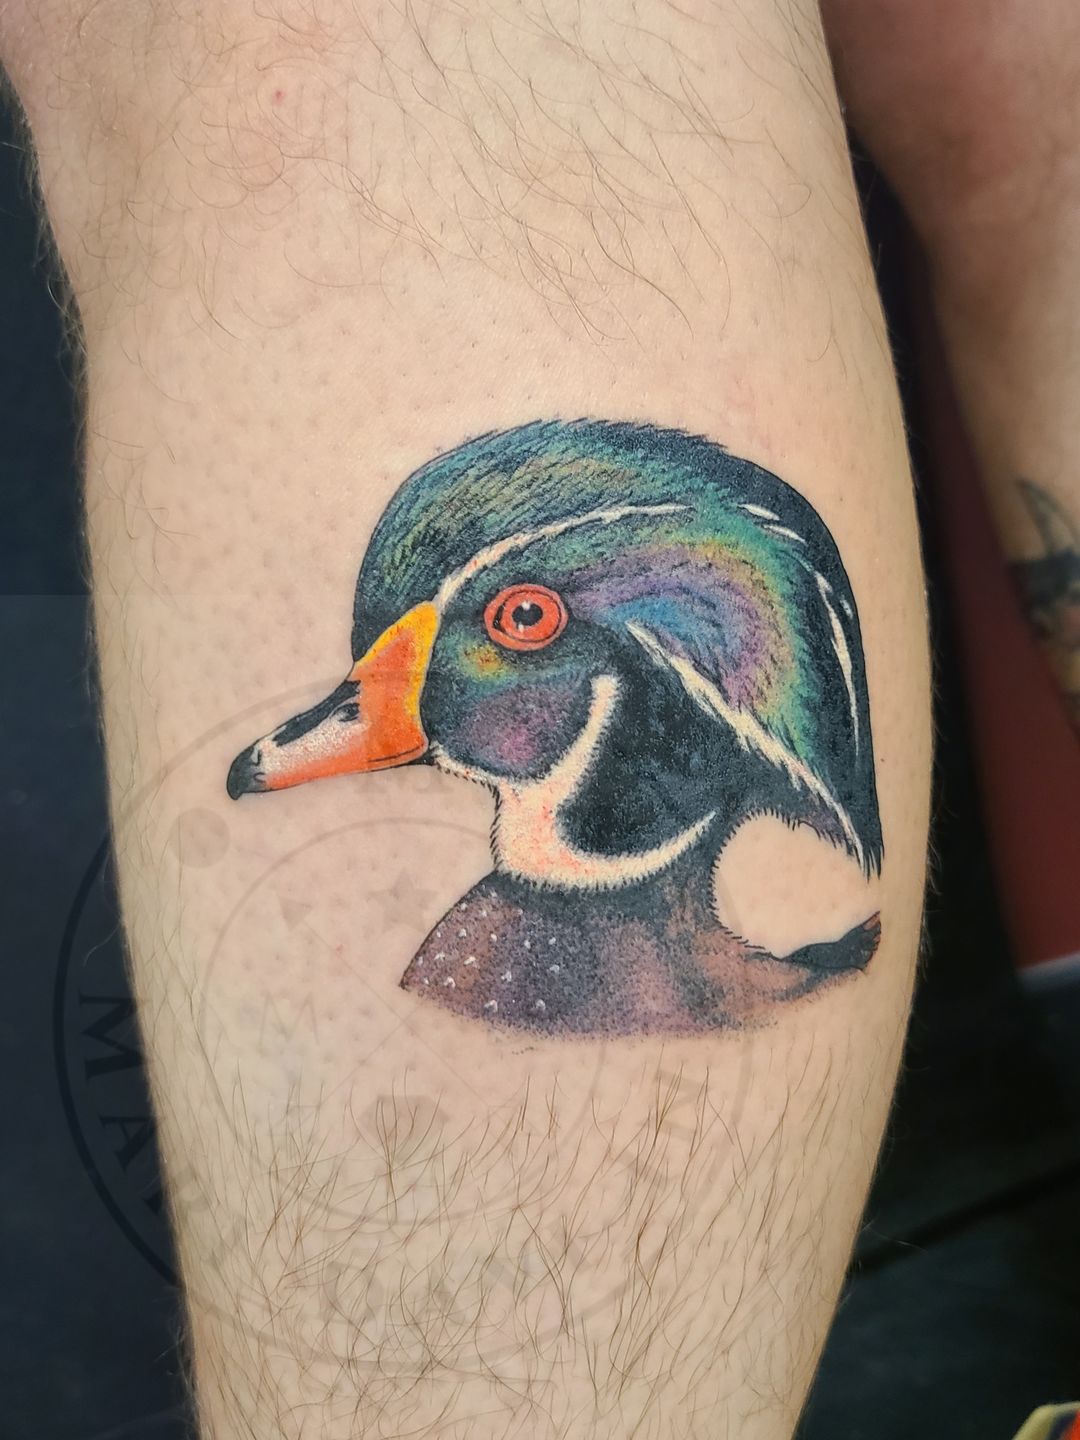 Santo Cuervo Tattoo on Twitter Stunning watercolour duck again here by  our talented may rydecaytattoosldn we love colour here and would love to  have some more watercolour brushstroke customdesign customtattoo  santocuervo santocuervotattoo 